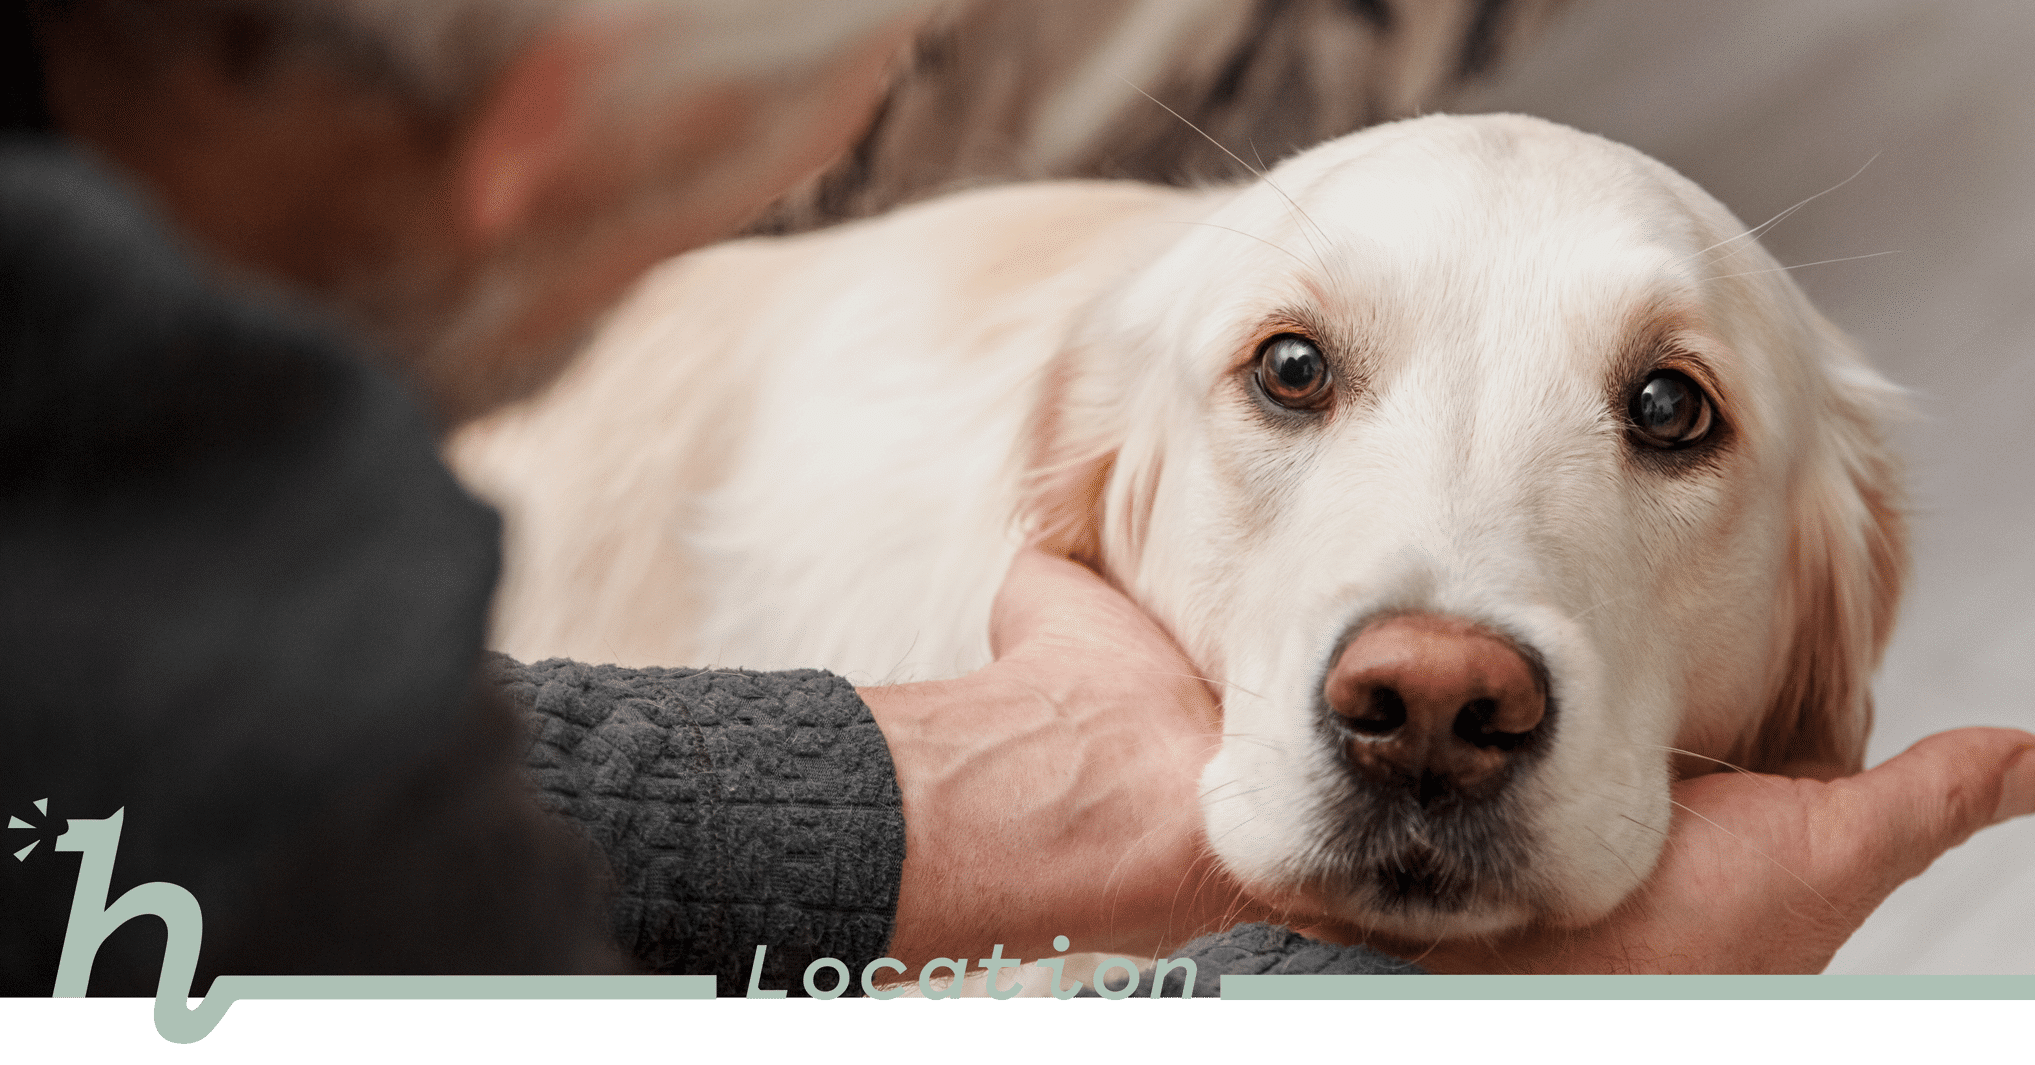 A yellow lab with it's head resting in someones hands with the text, "Location"